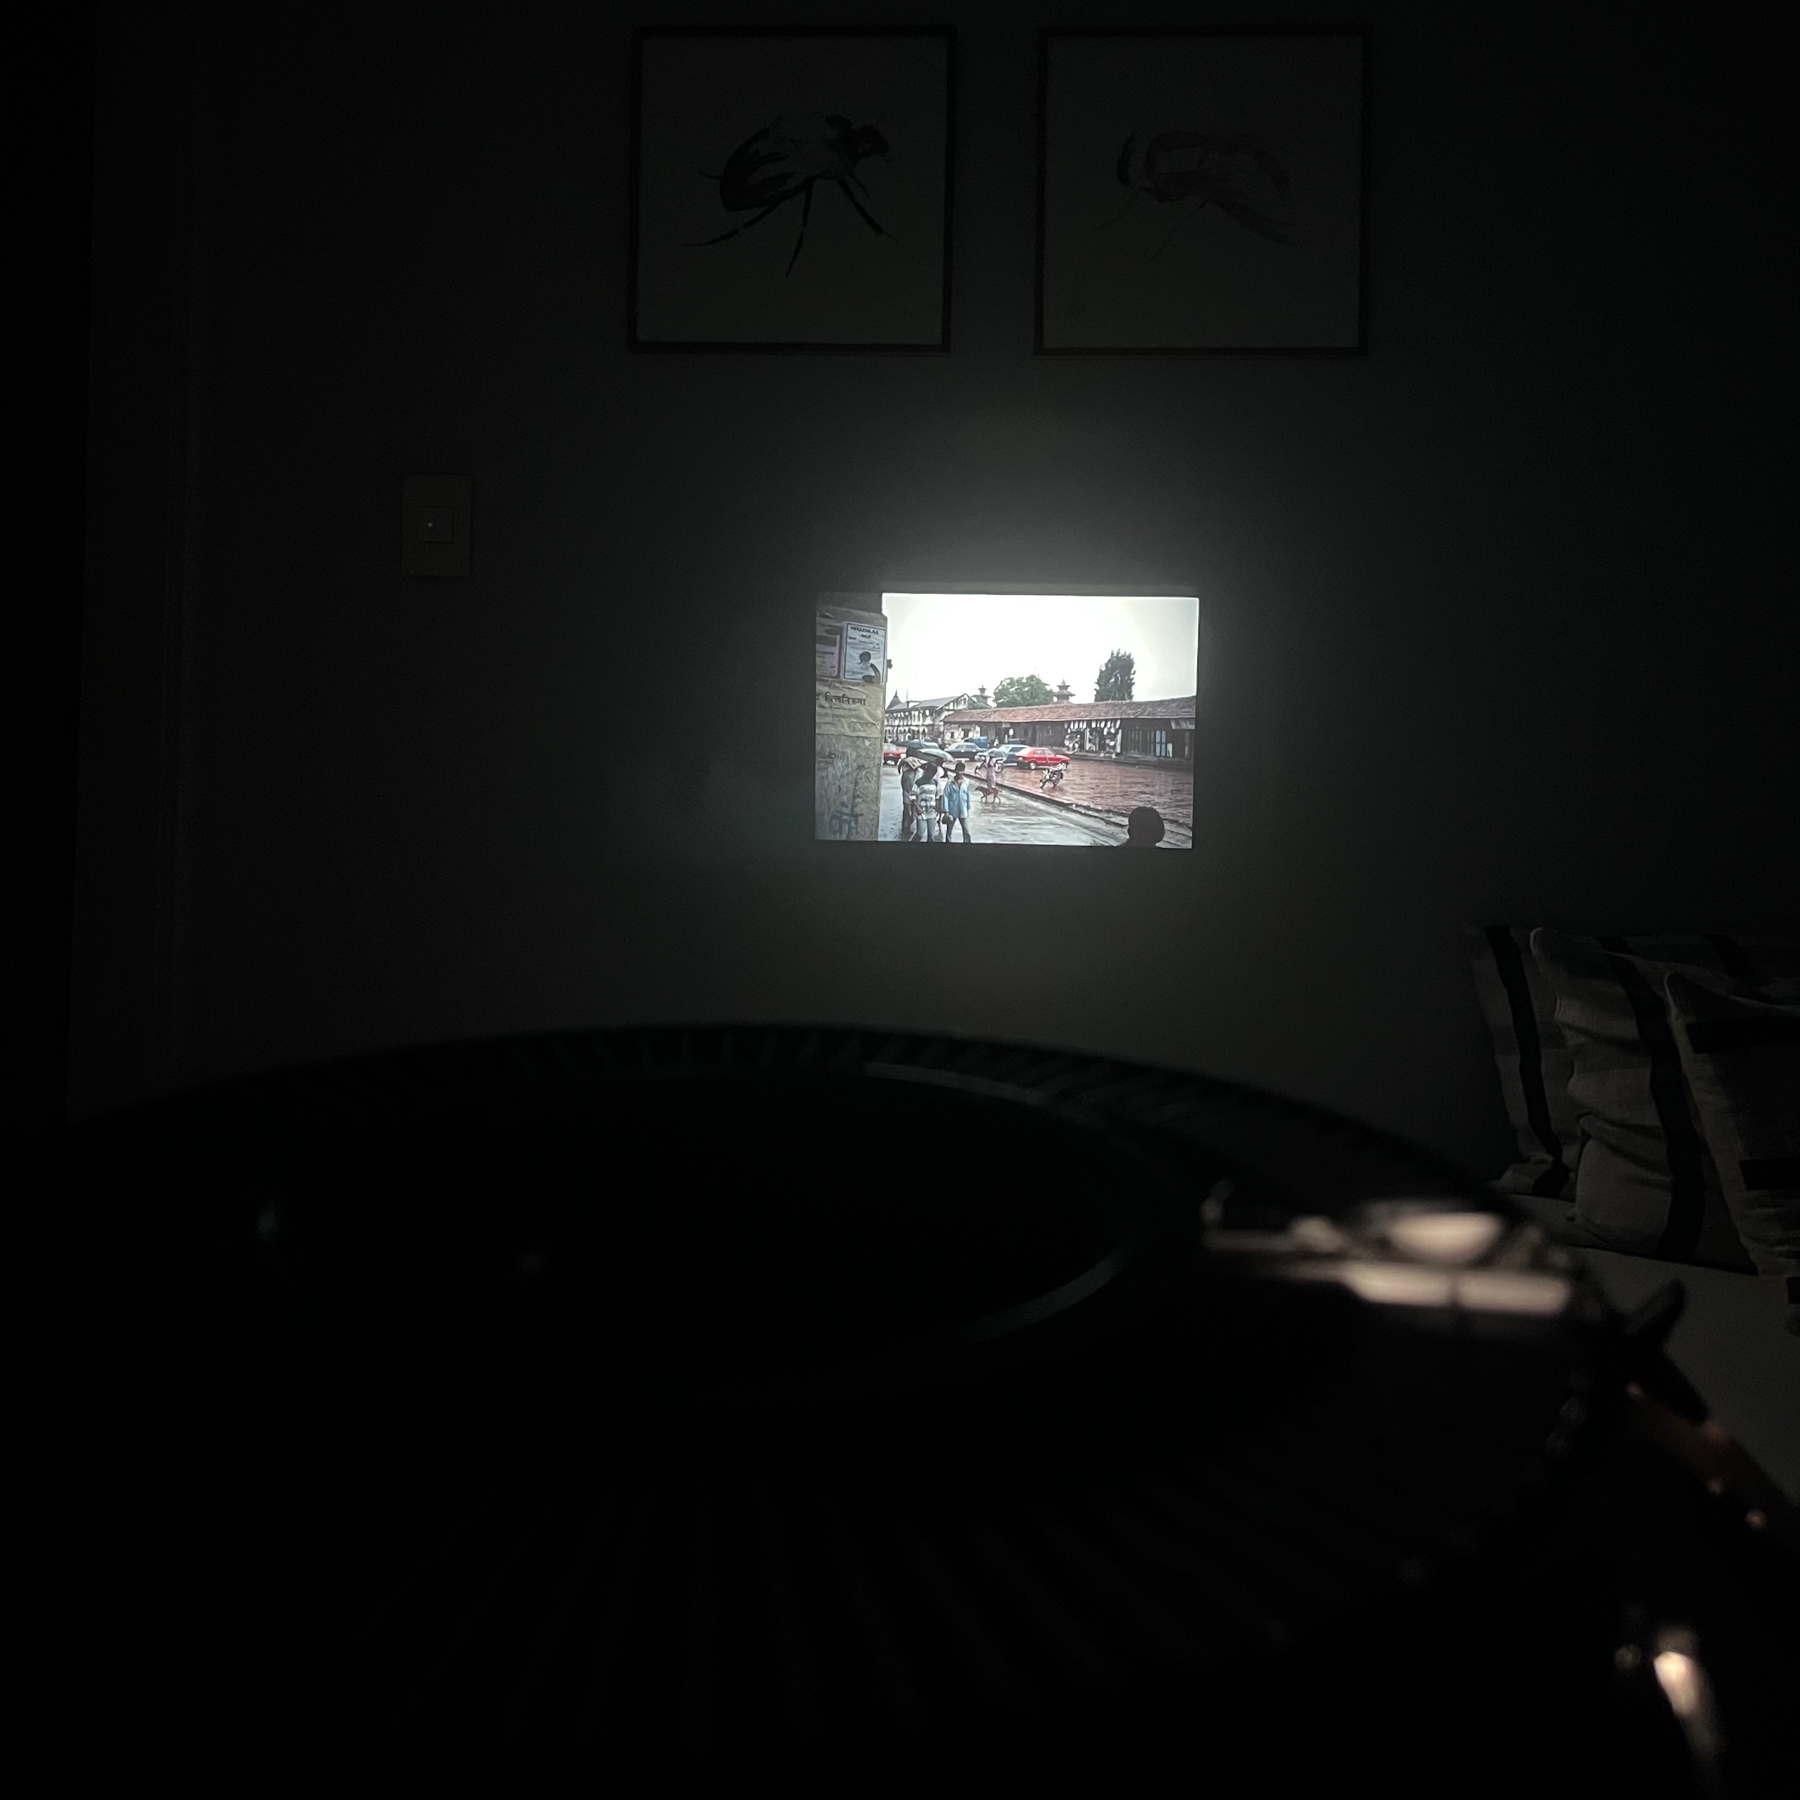 A dark room with a slide being projected onto a wall. In the foreground are lights from the projector, from where the photo is being taken